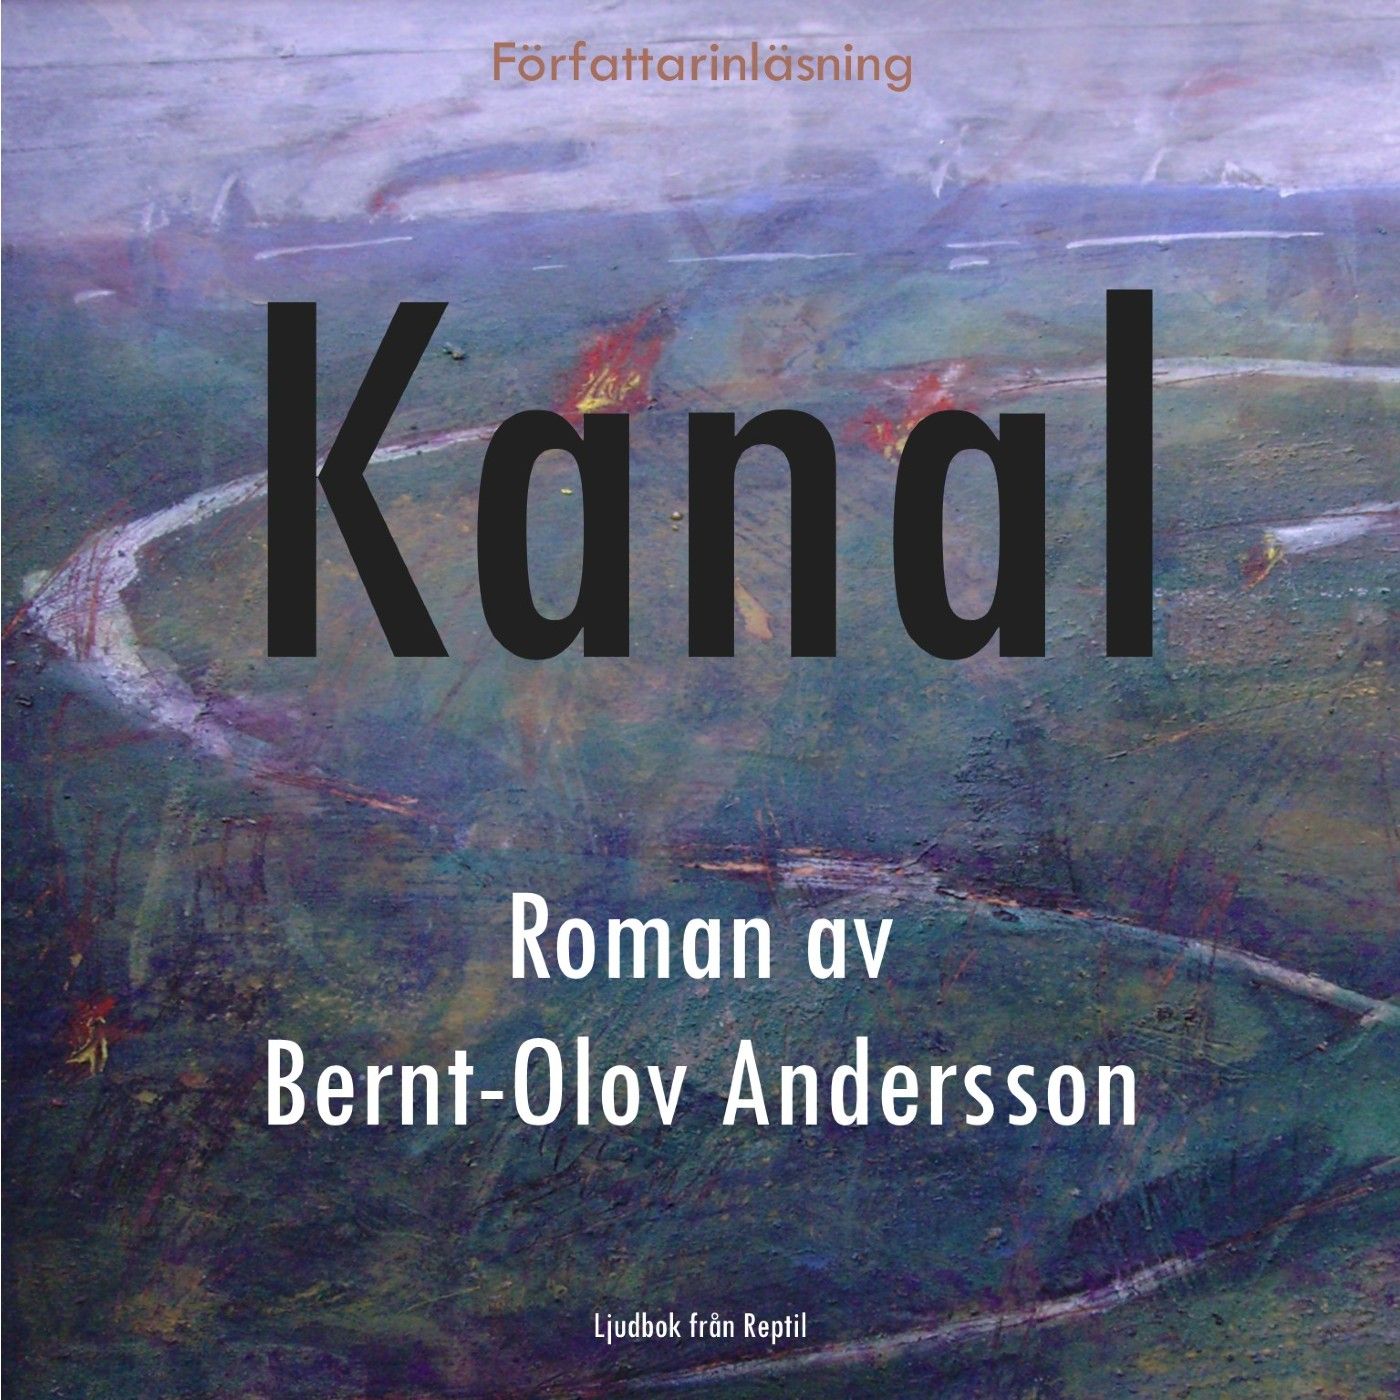 Kanal, audiobook by Bernt-Olov Andersson